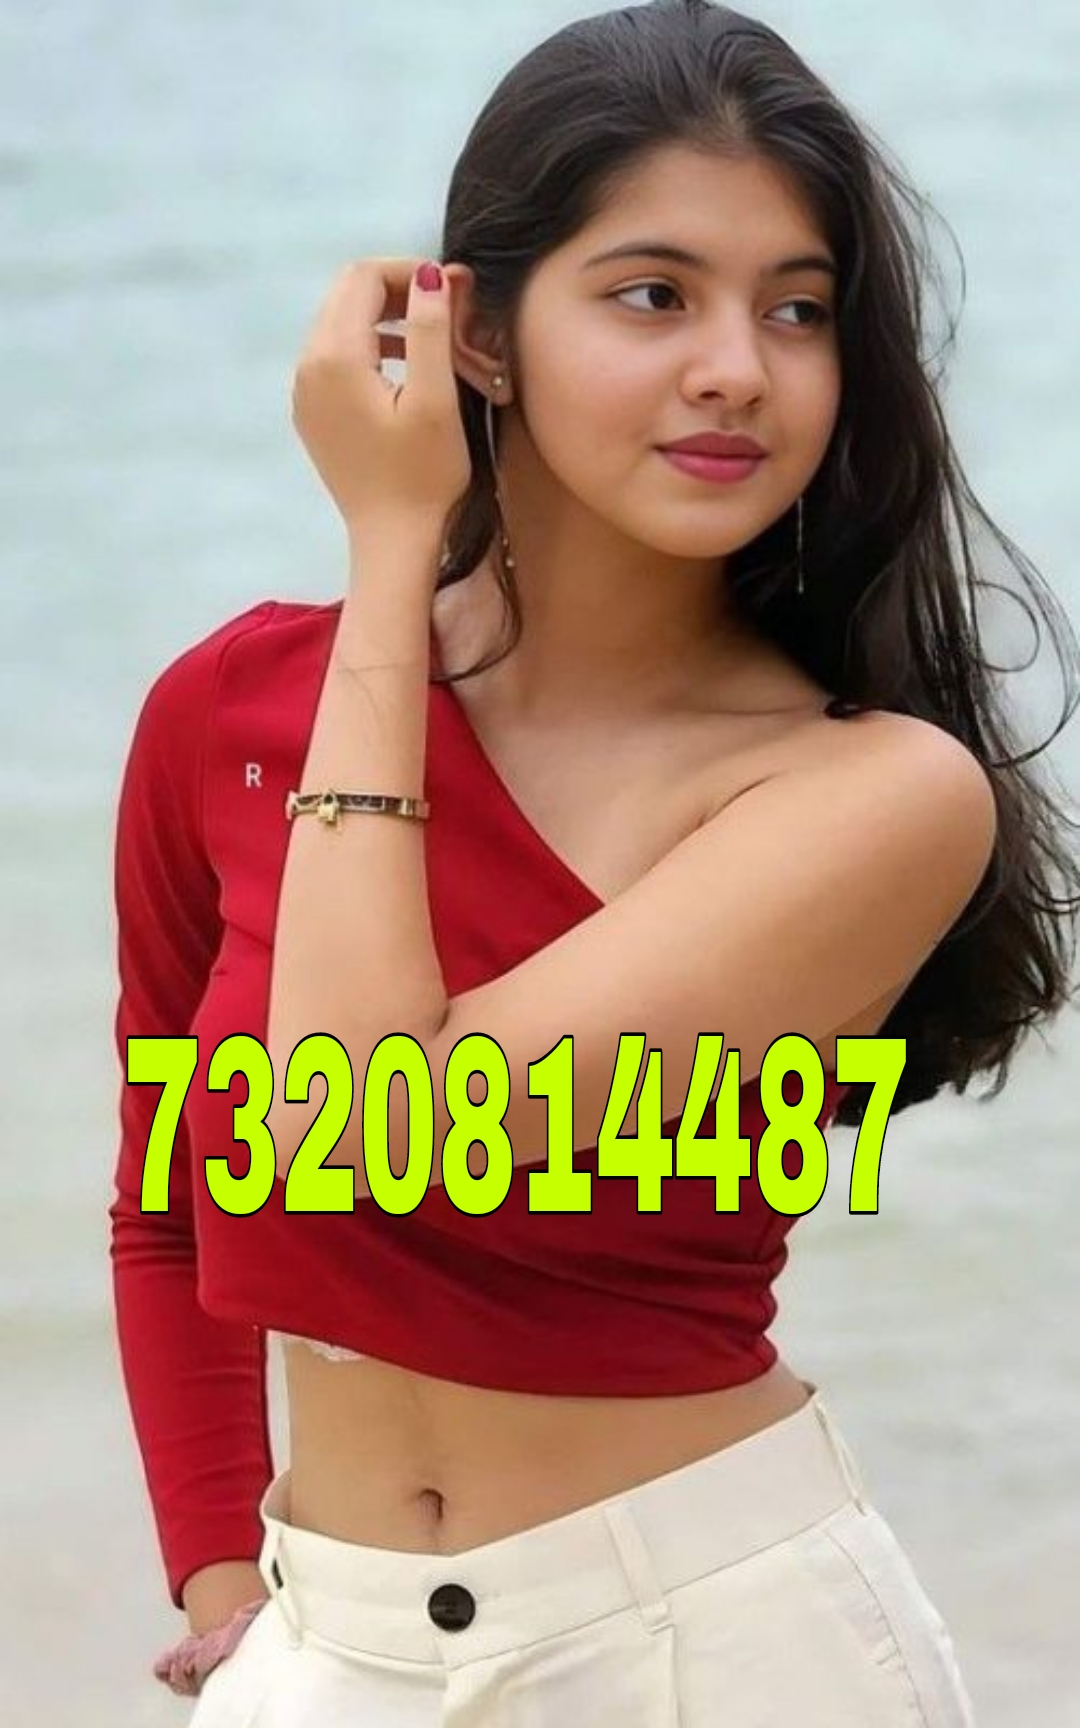 MEERUT COLLGE GIRL TOP MODEL AVAILABLE INDEPENDENT LOW PRICE GENUINE S